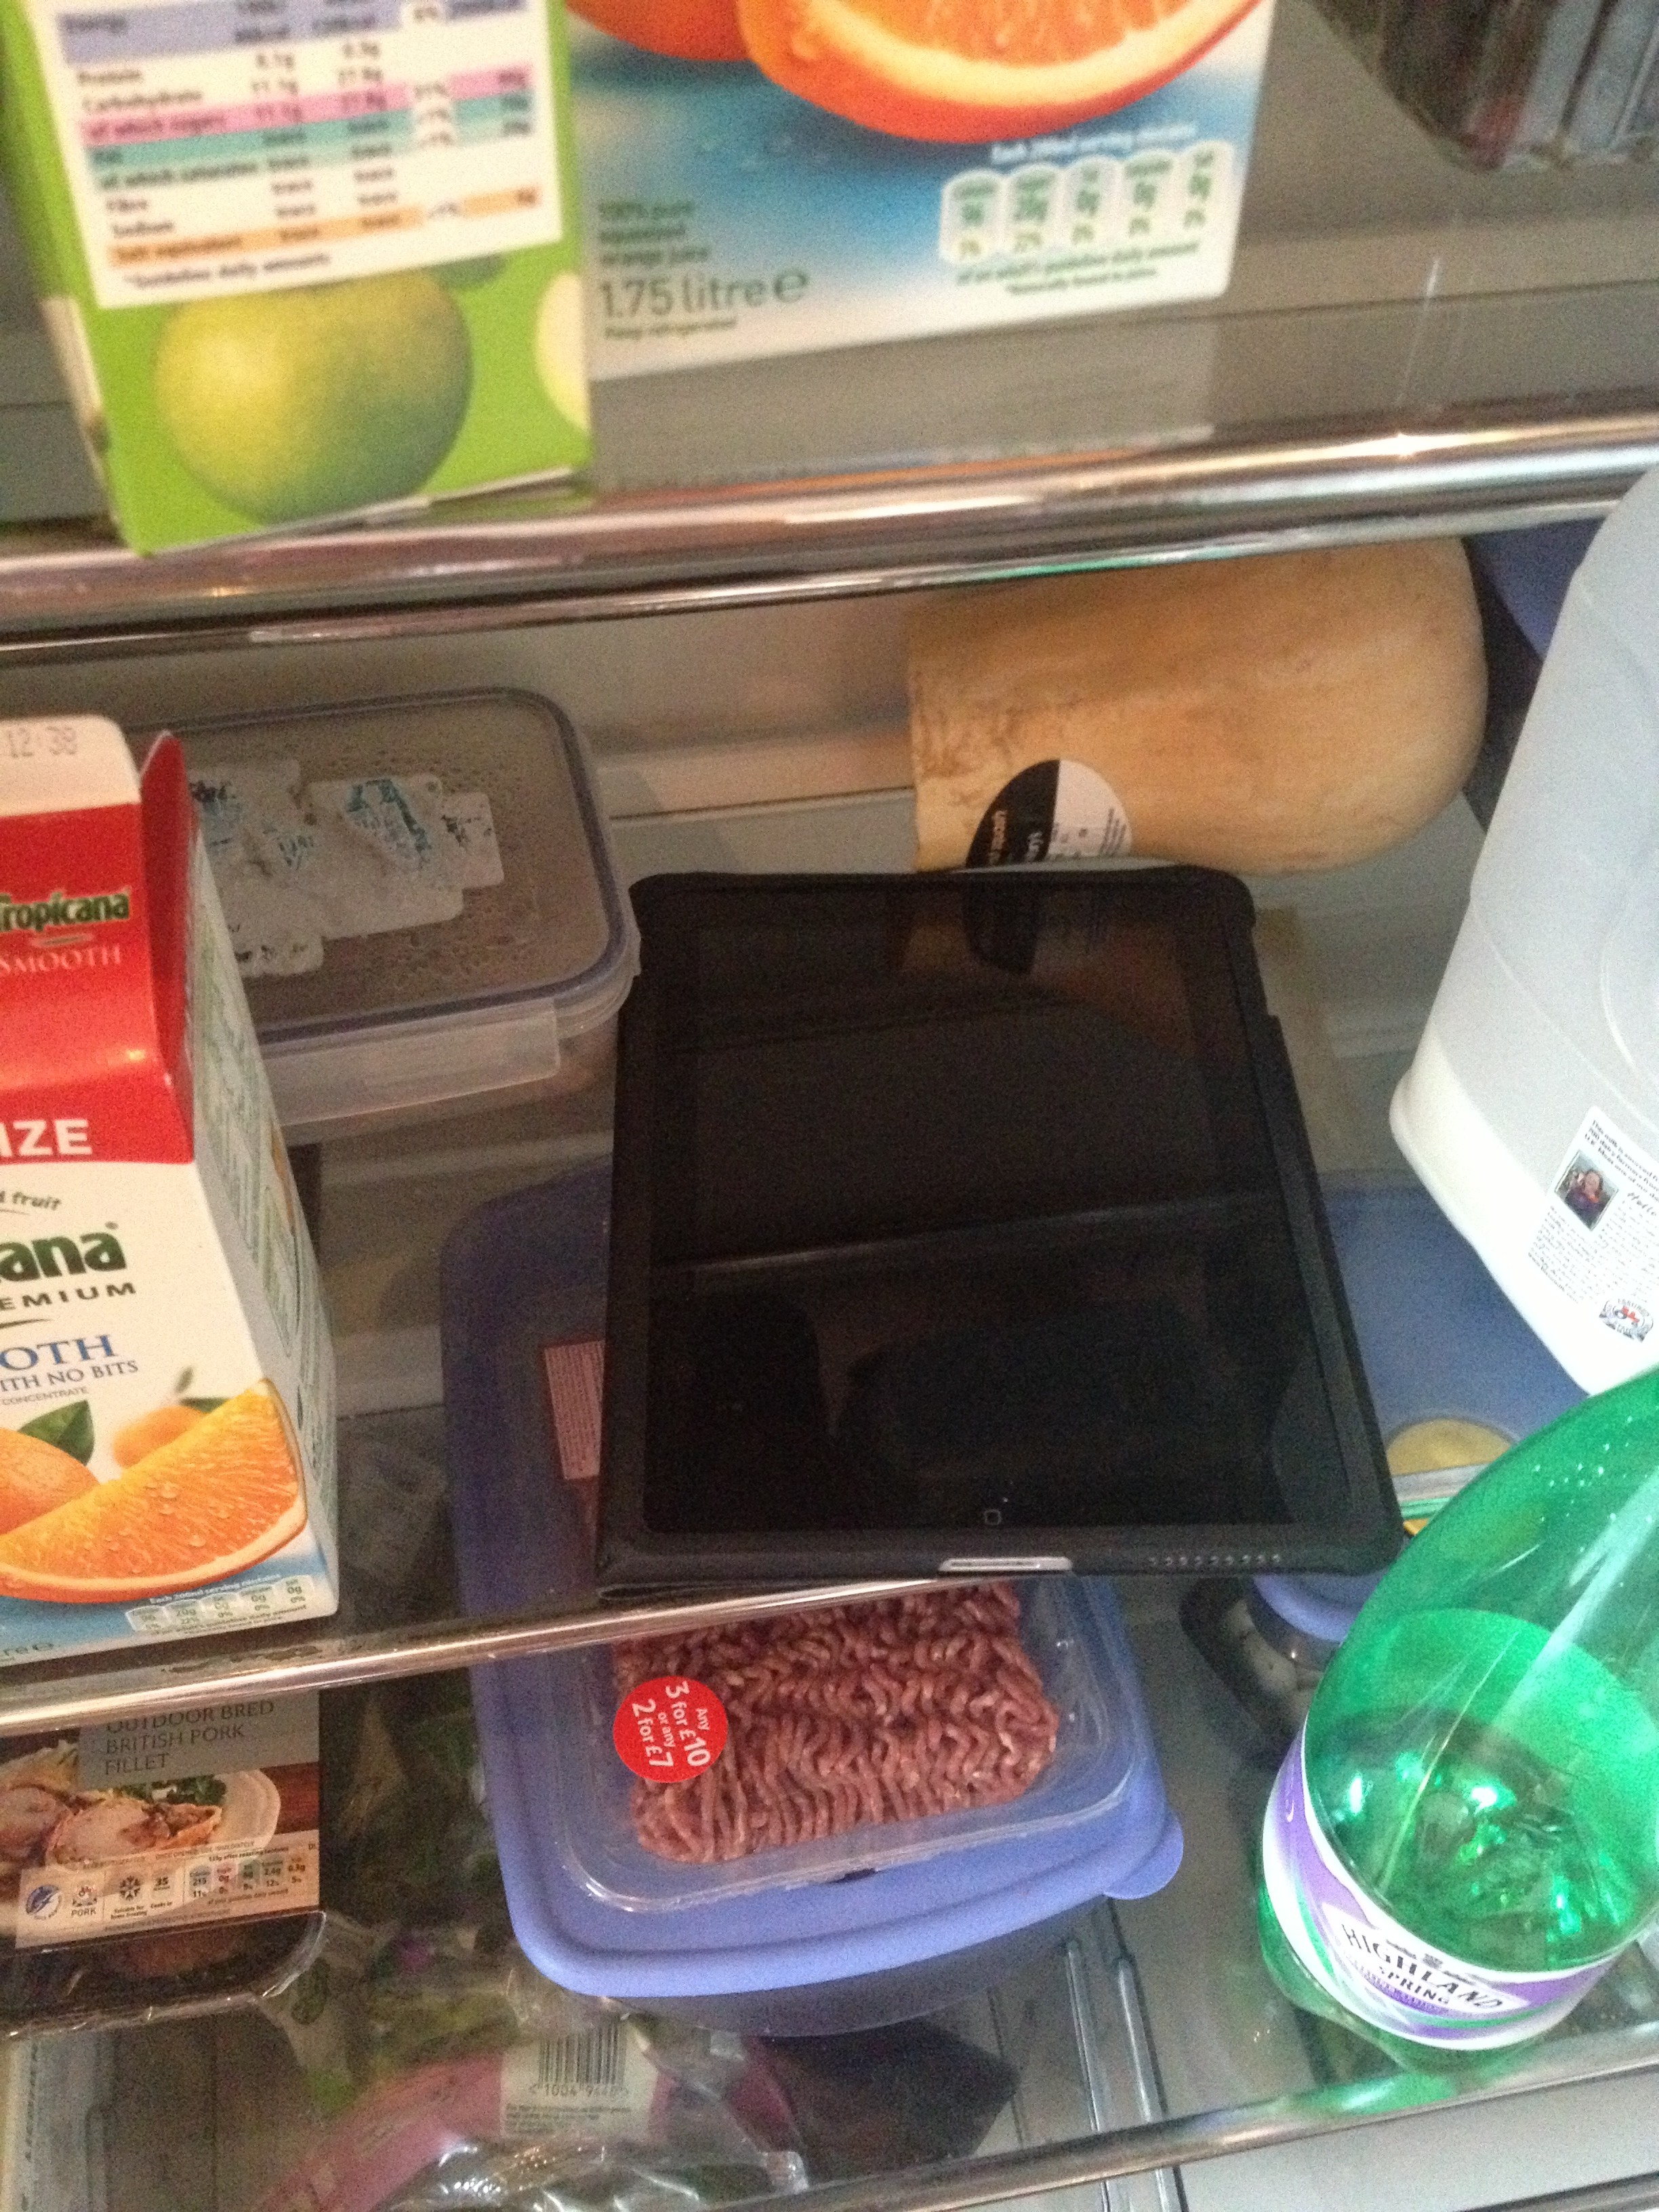 I found an iPad in our fridge. Don't ask, I don't know either.